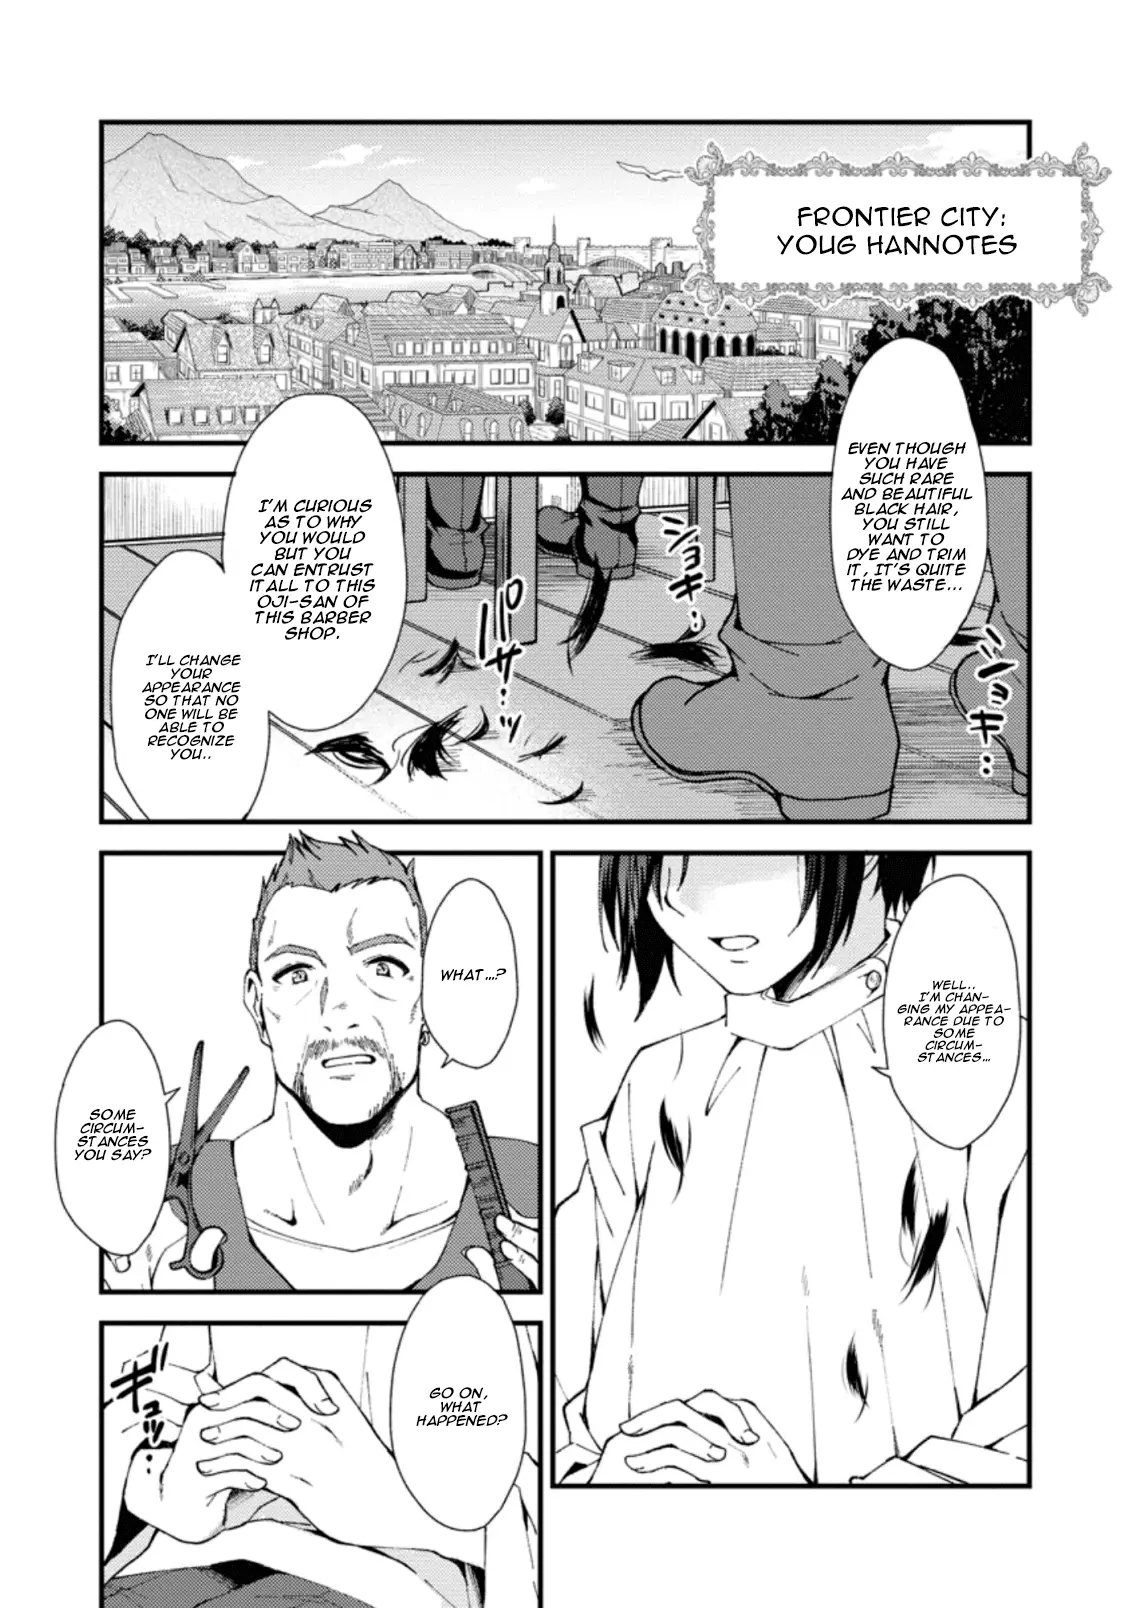 A Sword Master Childhood Friend Power Harassed Me Harshly, So I Broke Off Our Relationship And Made A Fresh Start At The Frontier As A Magic Swordsman - 1 page 2